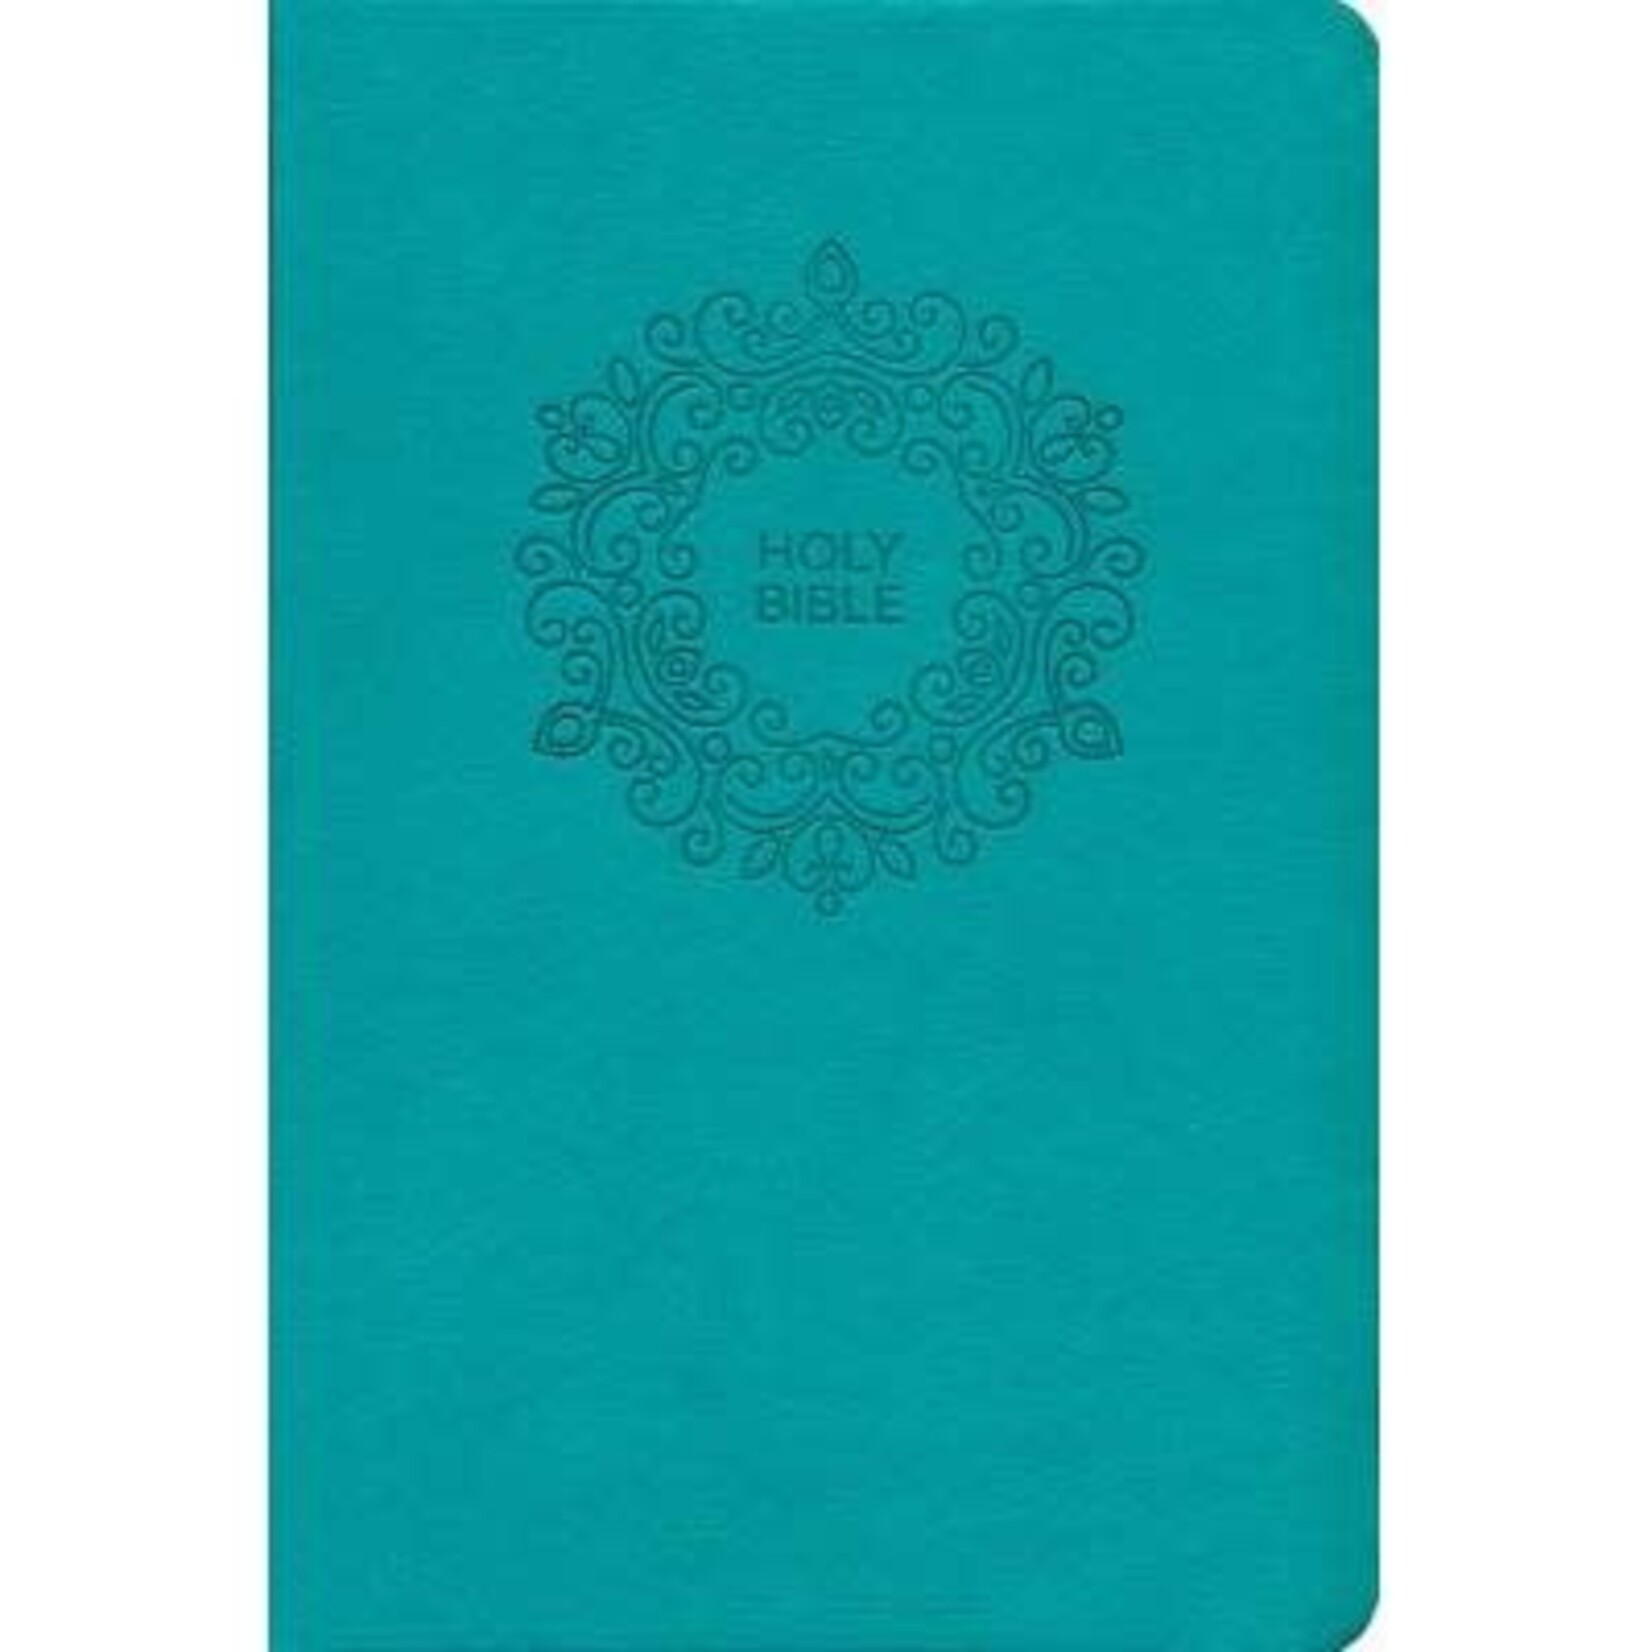 Holy Bible (NKJV) New King James Version Value Large Print Thinline Bible Turquoise Leathersoft